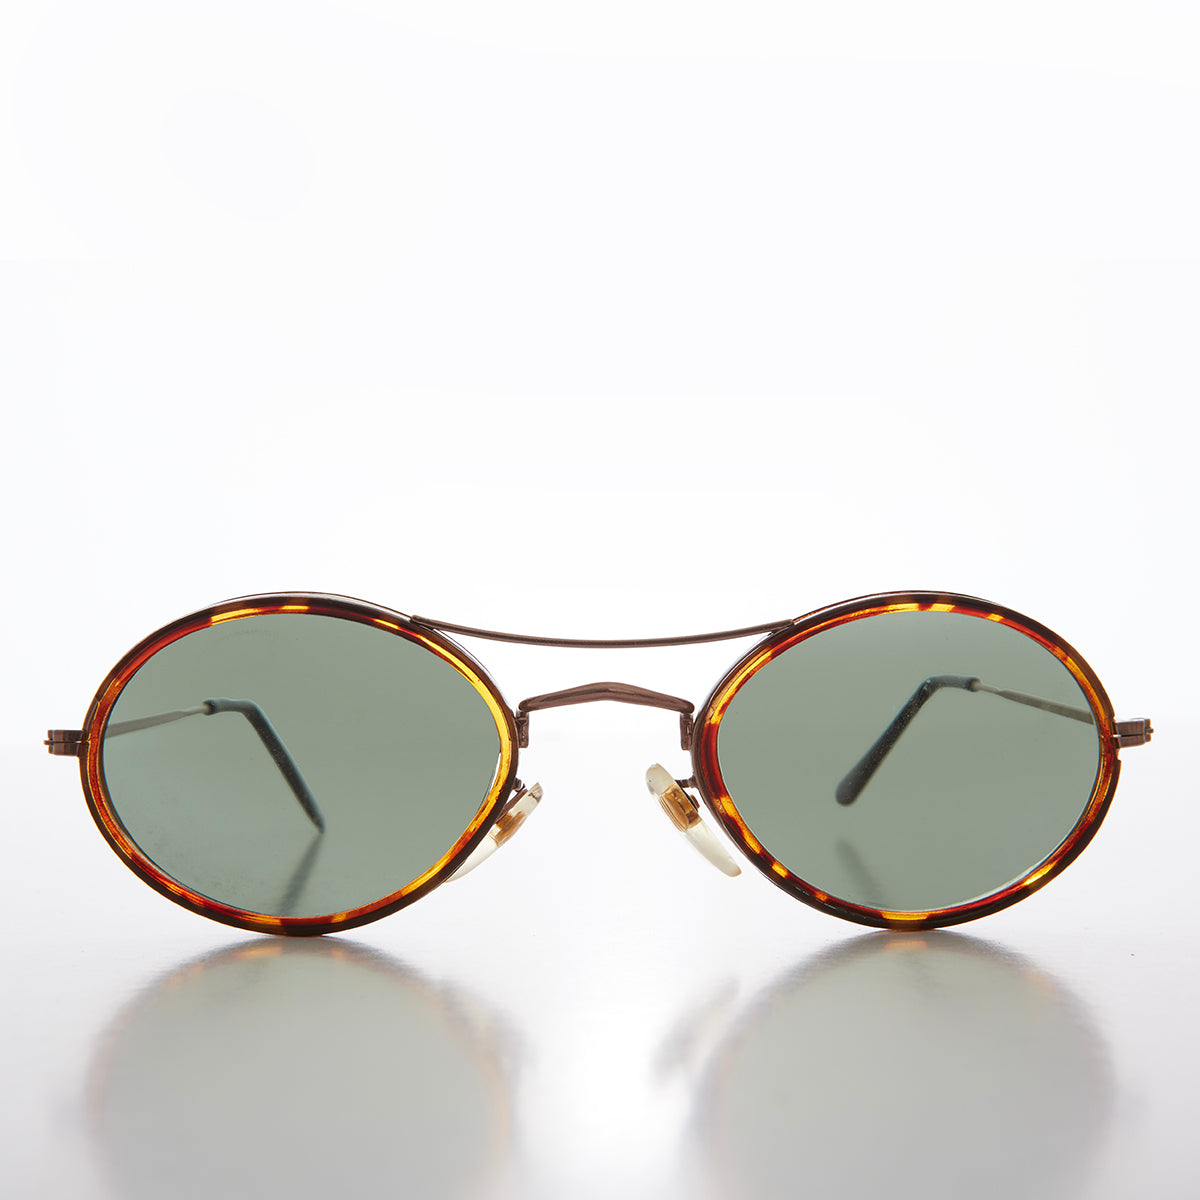 Oval Pilot Style Vintage Sunglasses - Welch